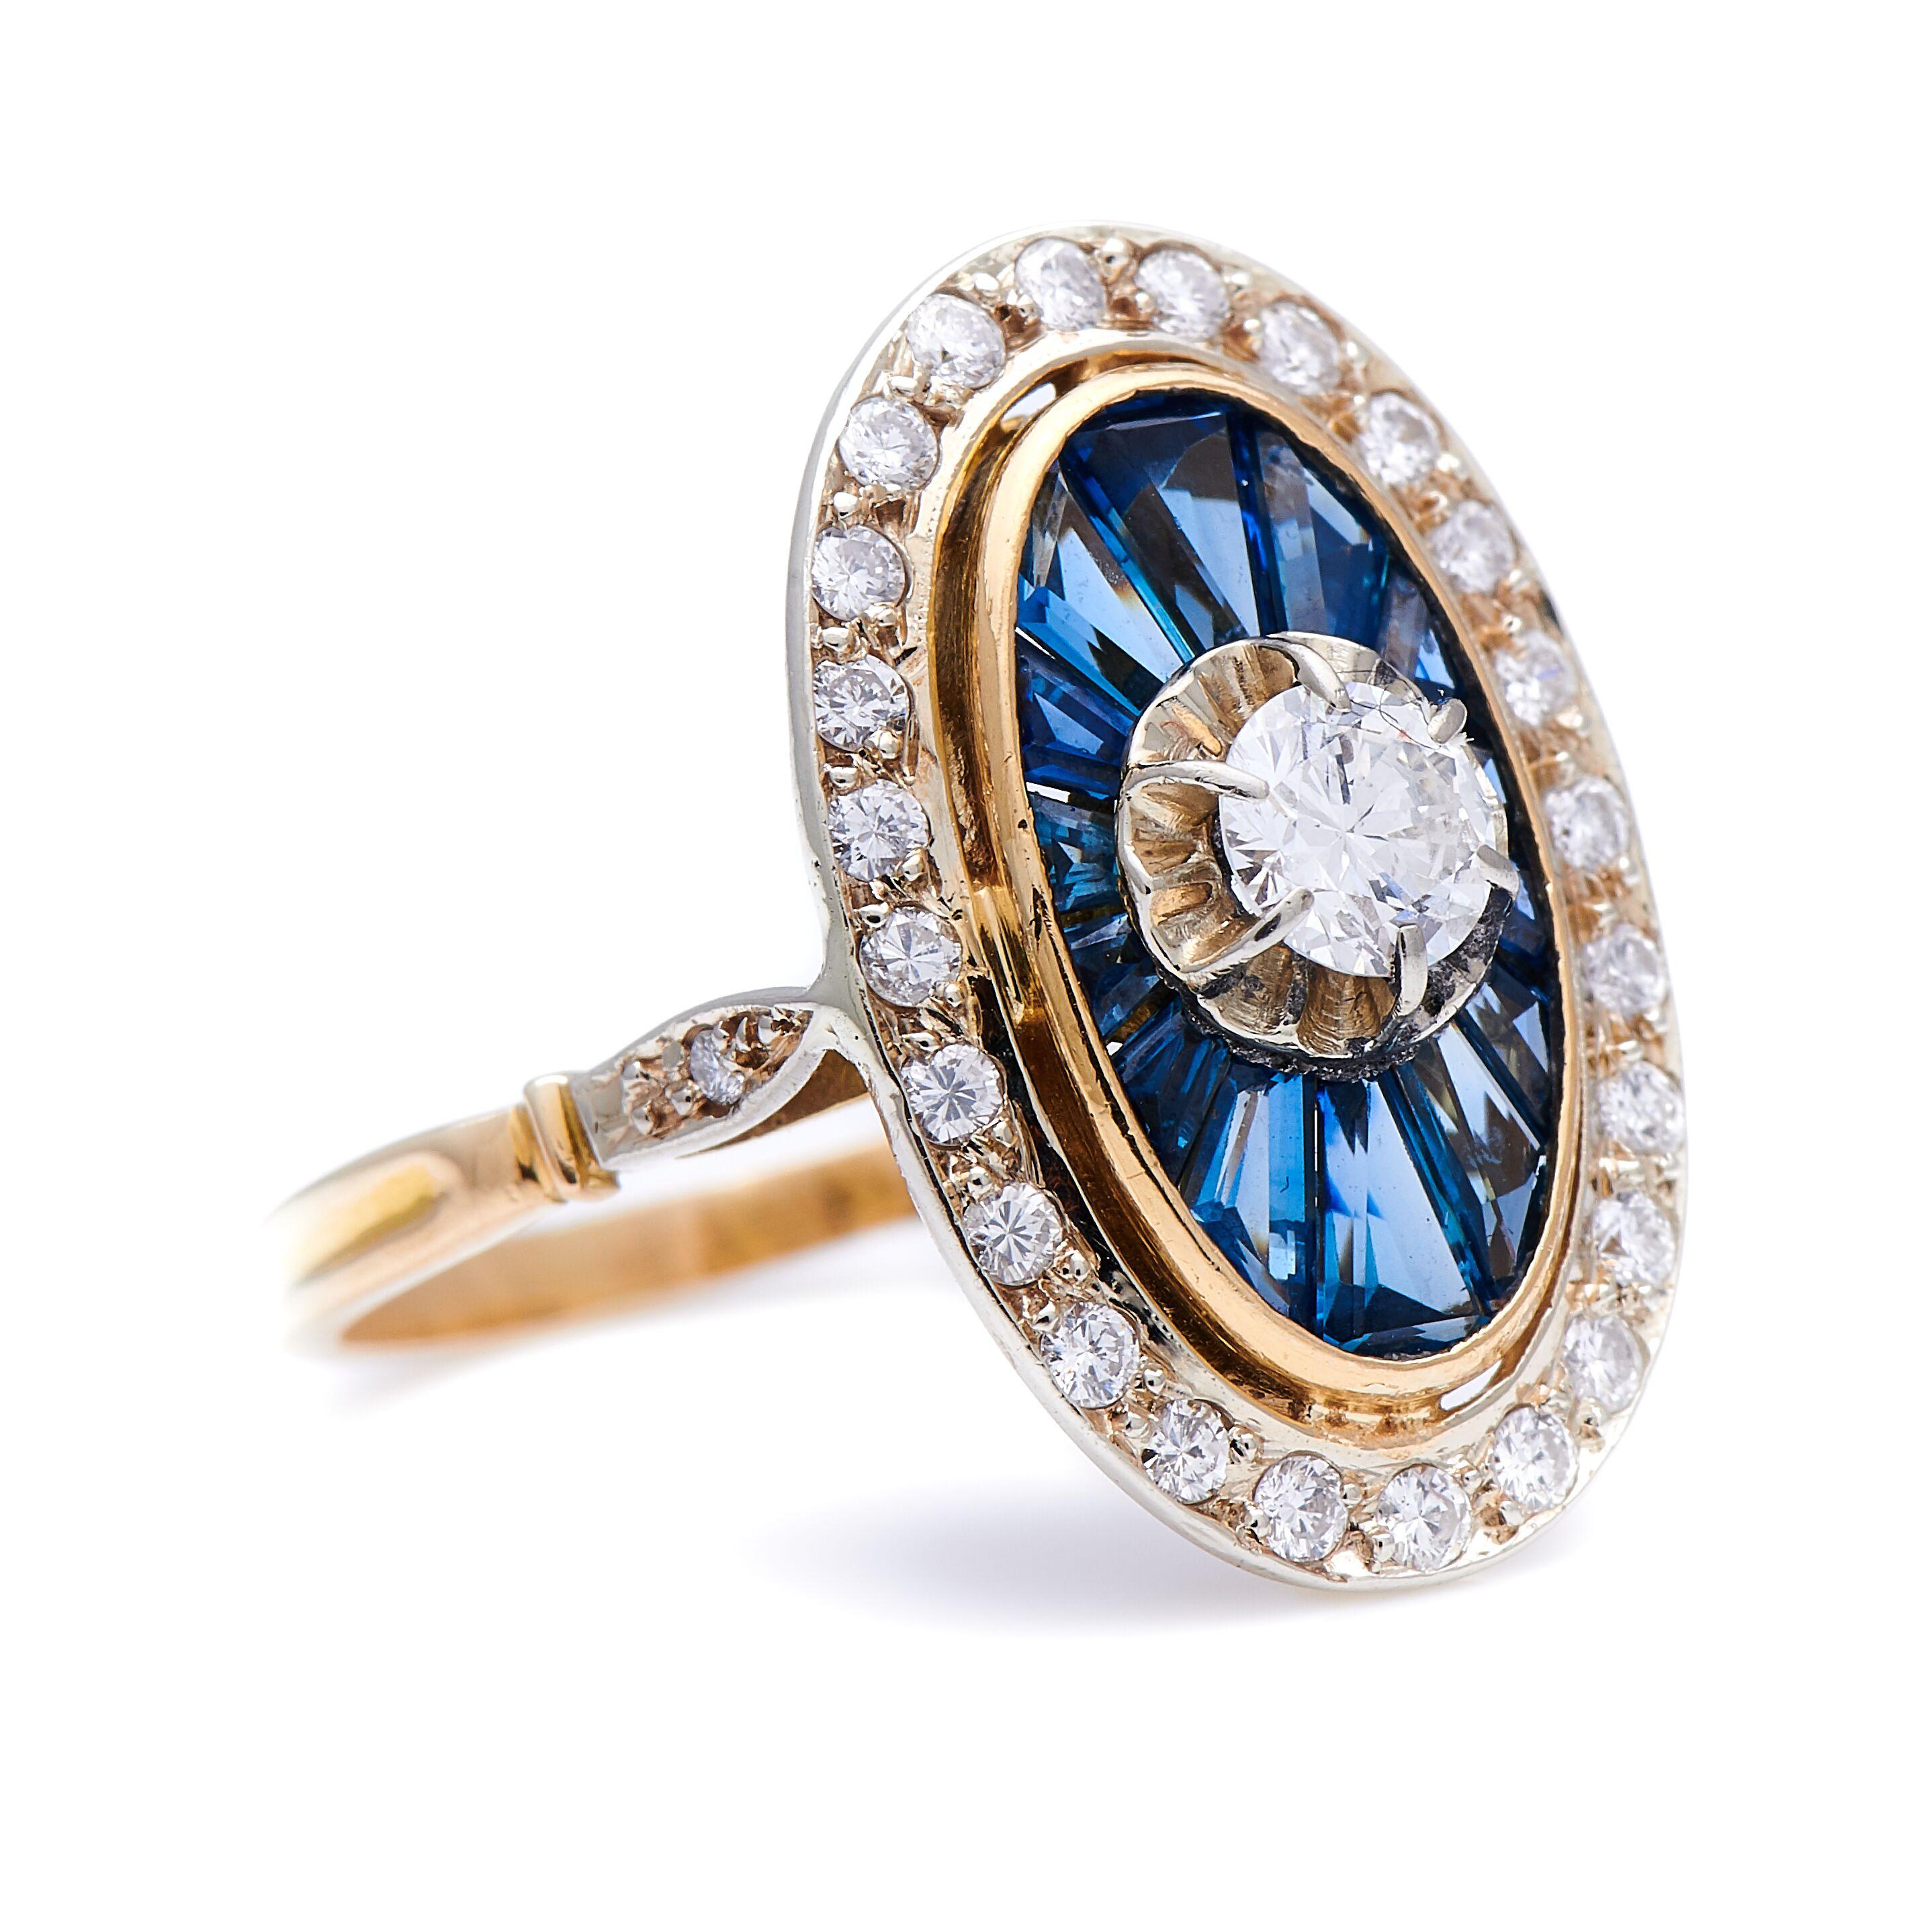 Diamond and sapphire ring, 1930s. Of oval form, the centre claw-set with a brilliant-cut diamond weighing 0.35 carats, within a surround of radiating calibré-cut untreated natural sapphires, to an outer border of brilliant-cut diamonds. The